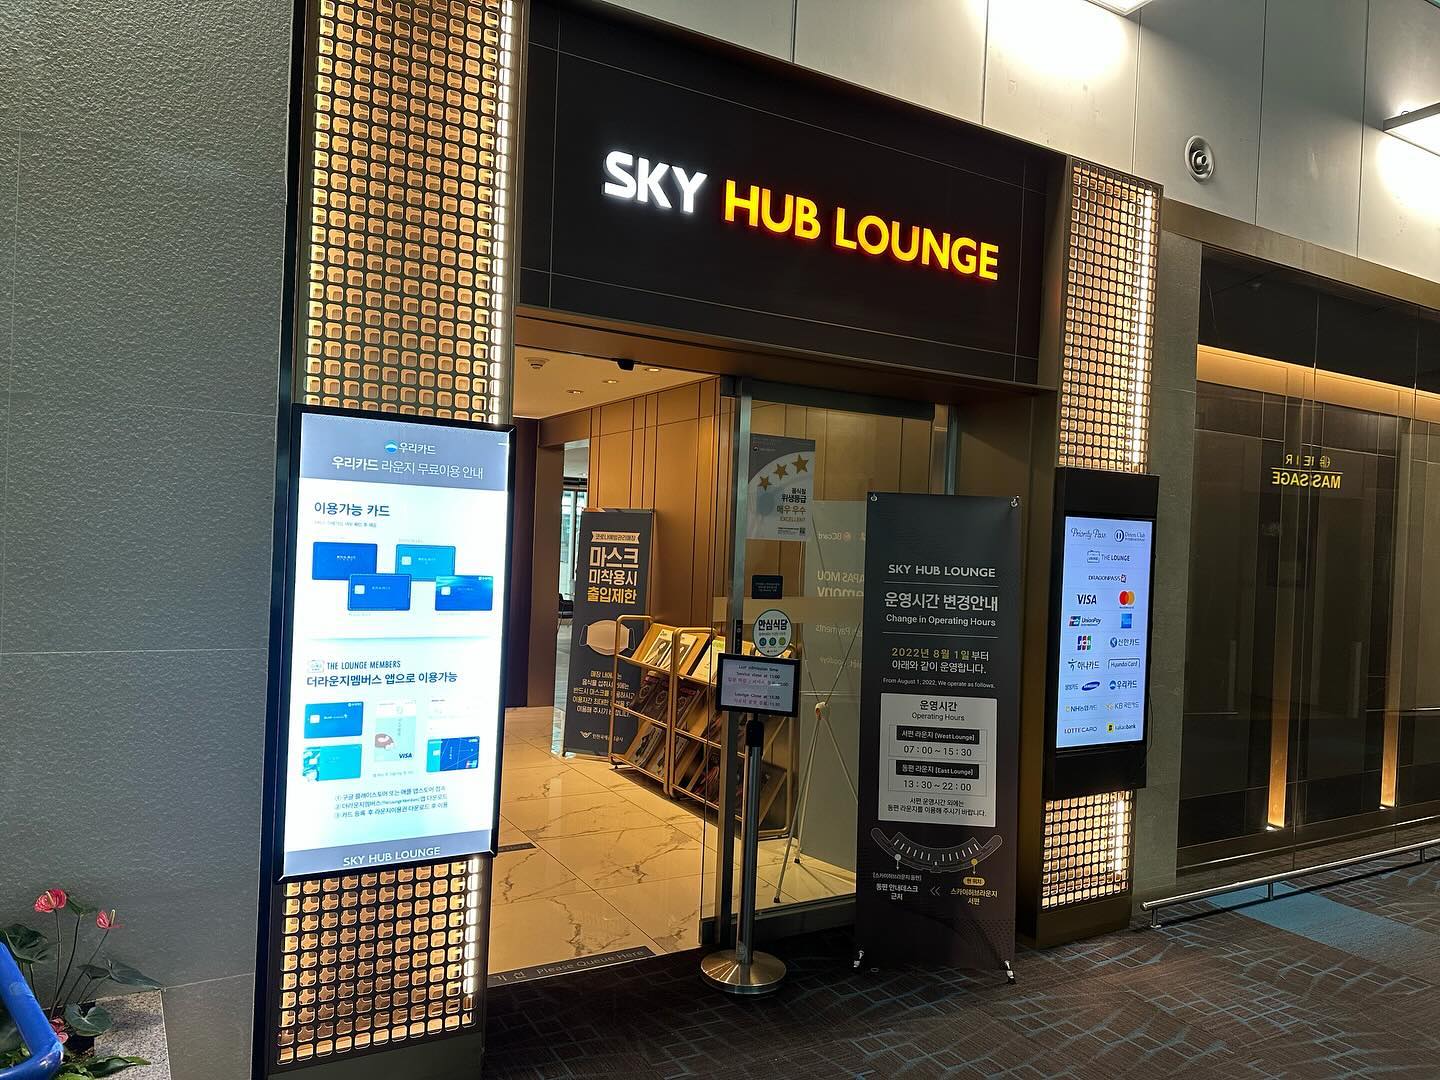 Sky Hub lounge at Incheon Airport in South Korea